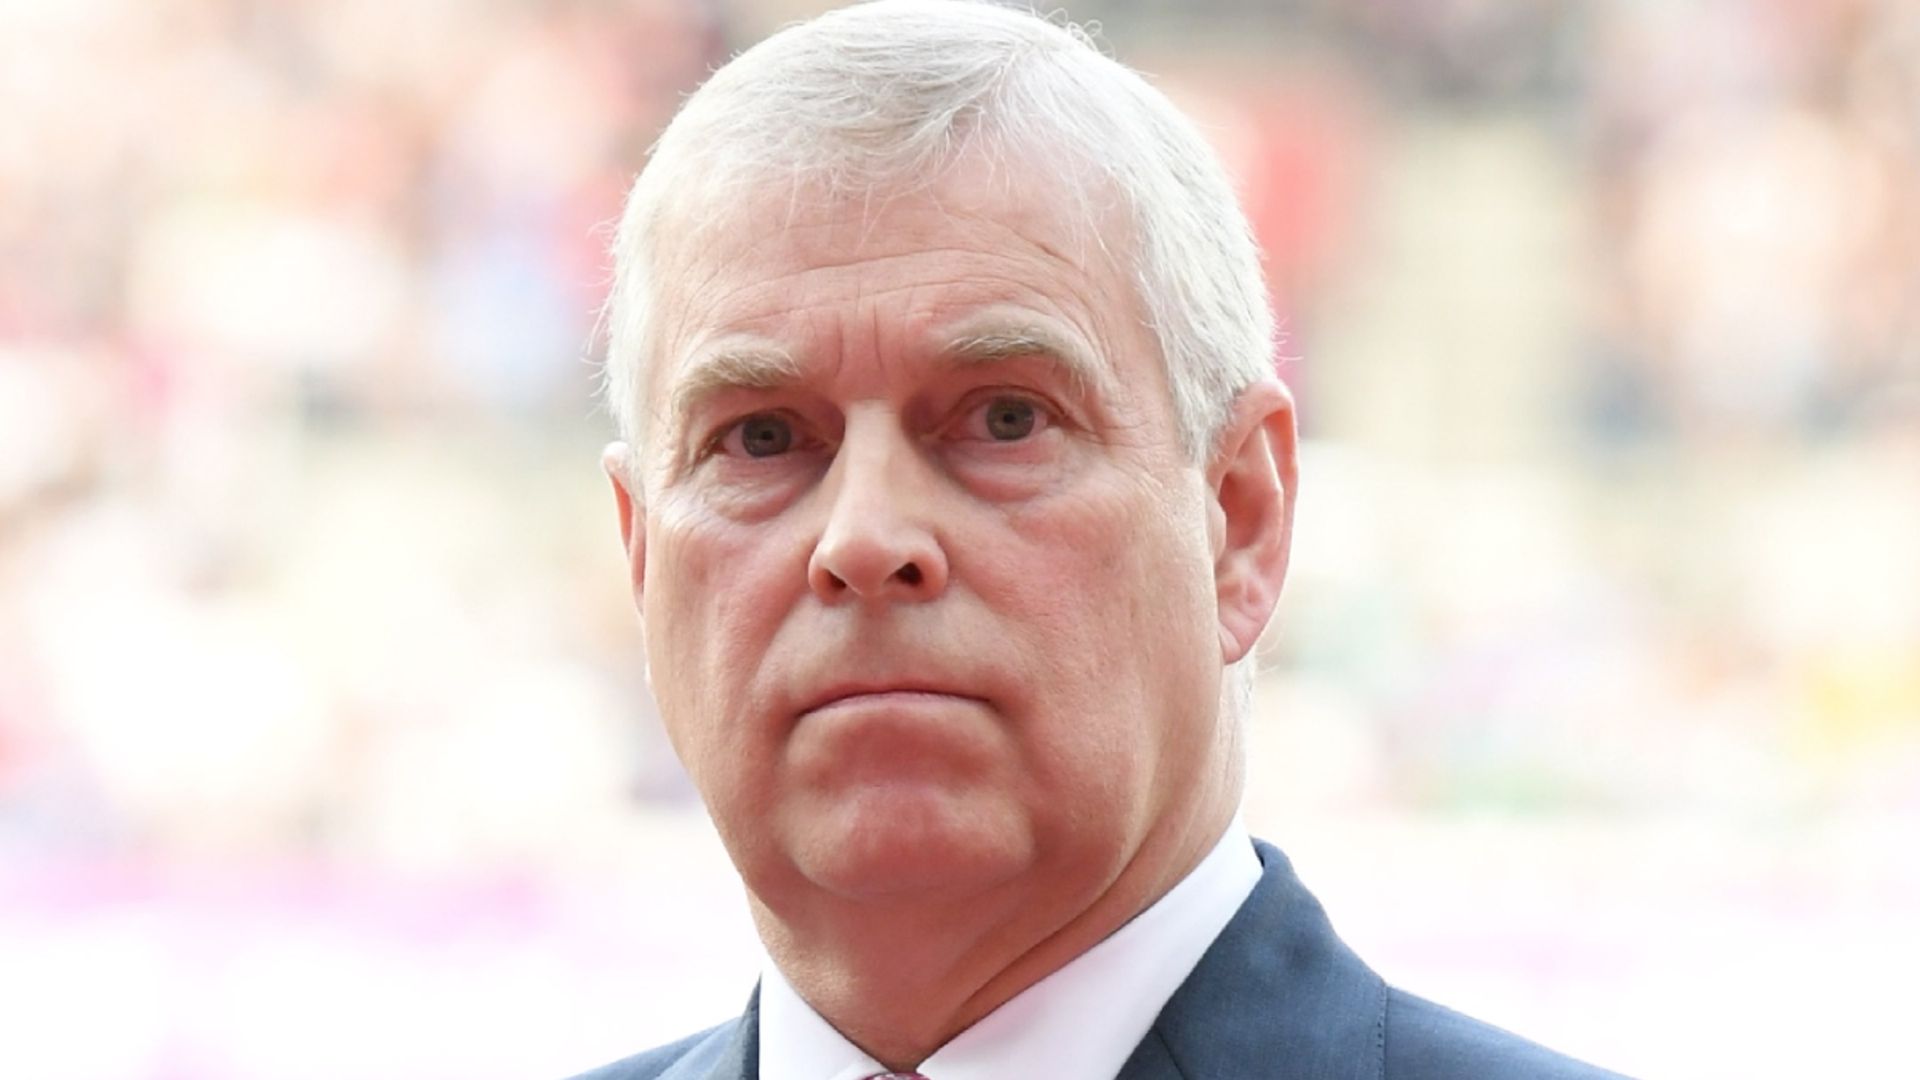 Prince Andrew can be sued by Virginia Giuffre for sexual assault, says court